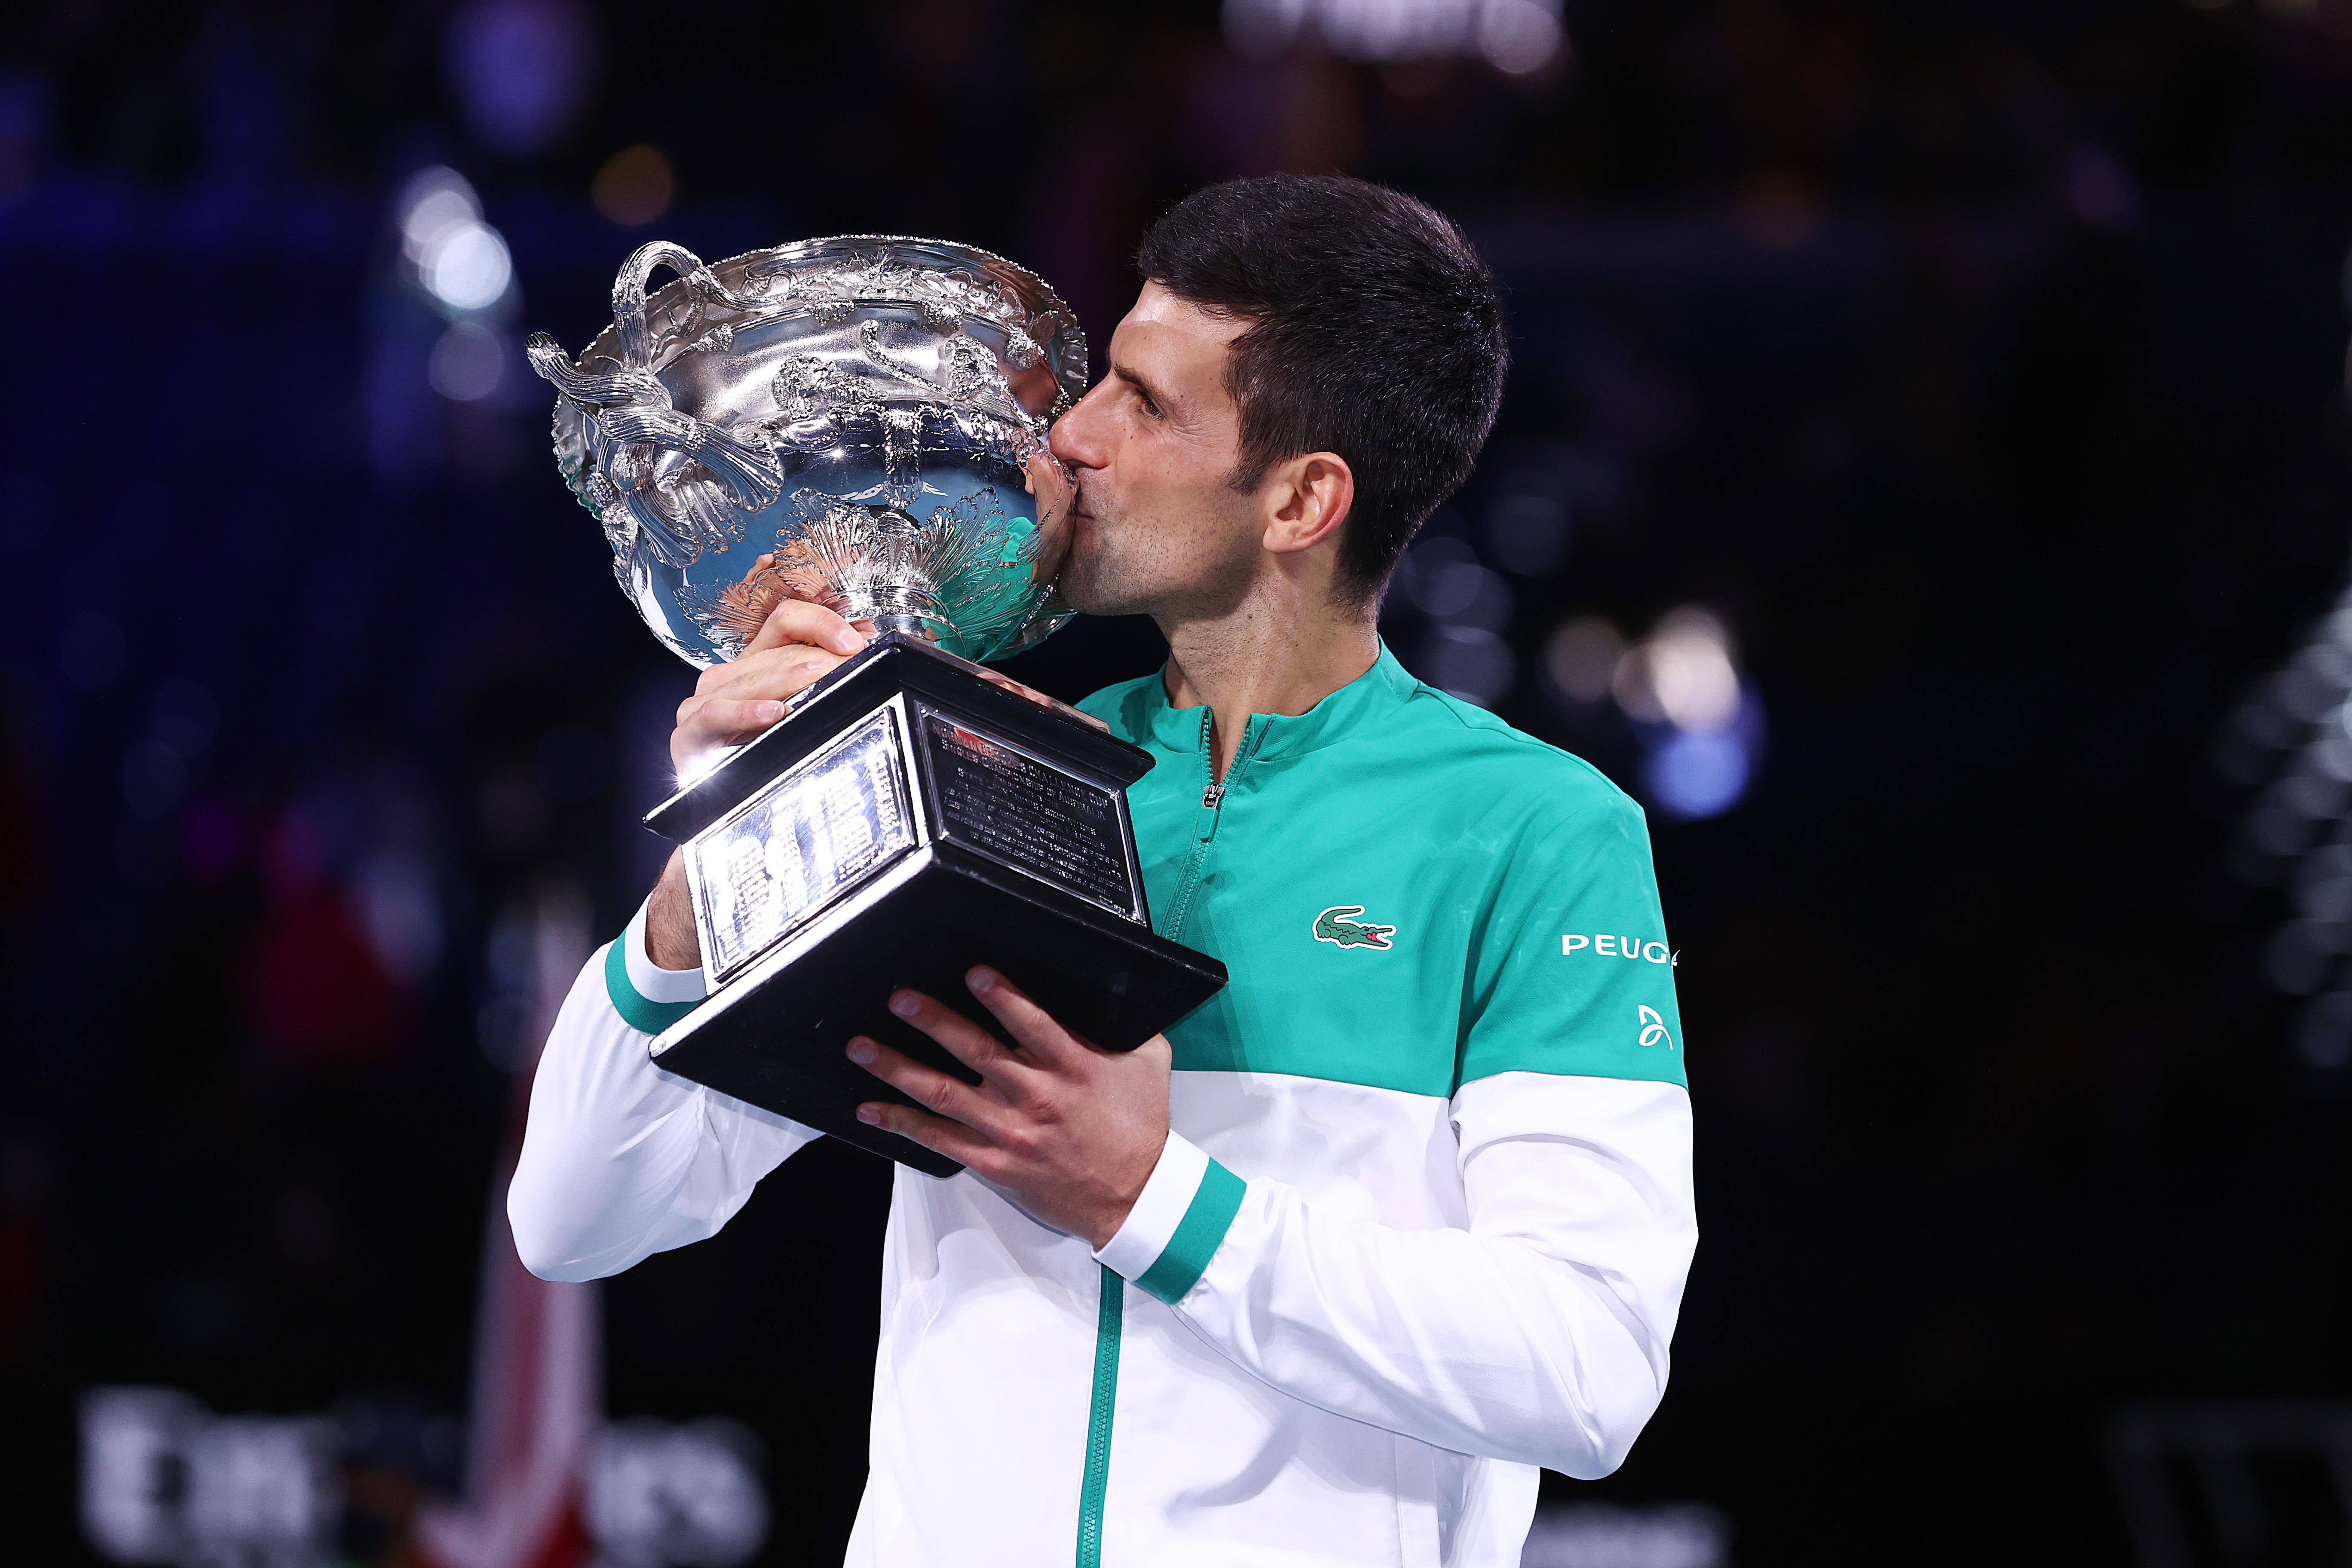 Novak Djokovic holds the Norman Brookes Challenge Cup as he celebrates victory in the men’s singles final against Daniil Medvedev of Russia on day 14 of the 2021 Australian Open last February. 